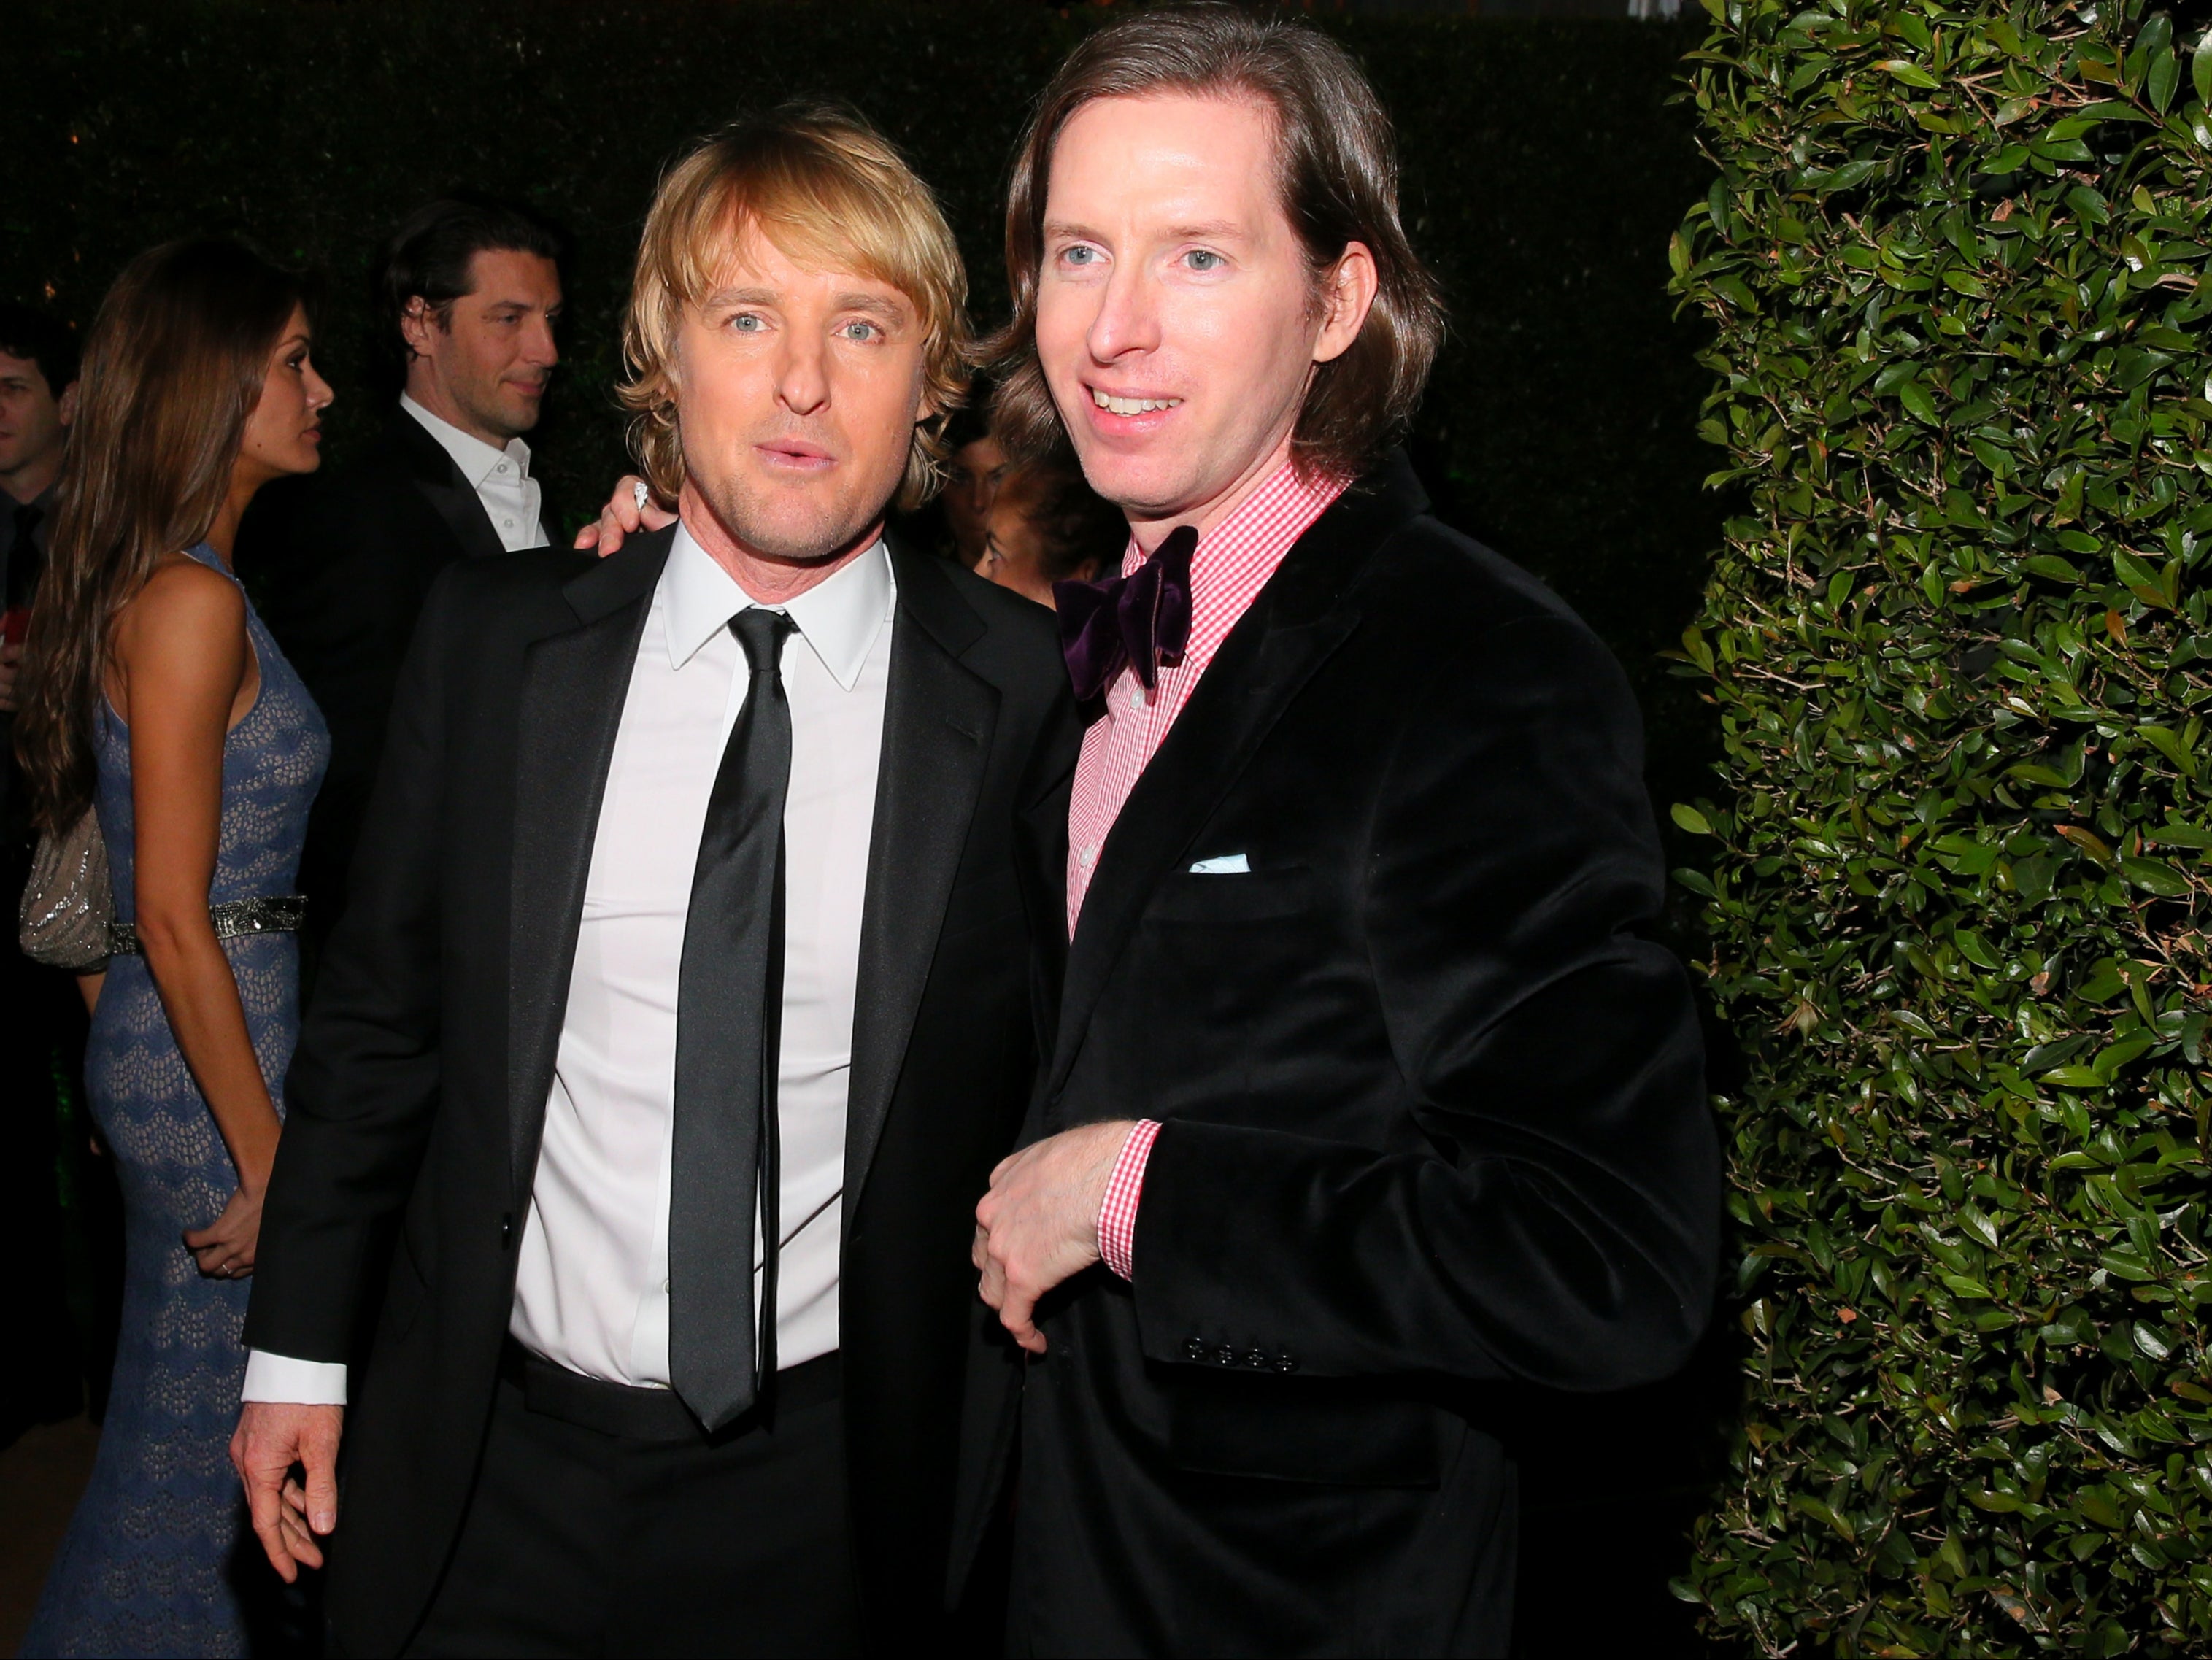 Owen Wilson and Wes Anderson